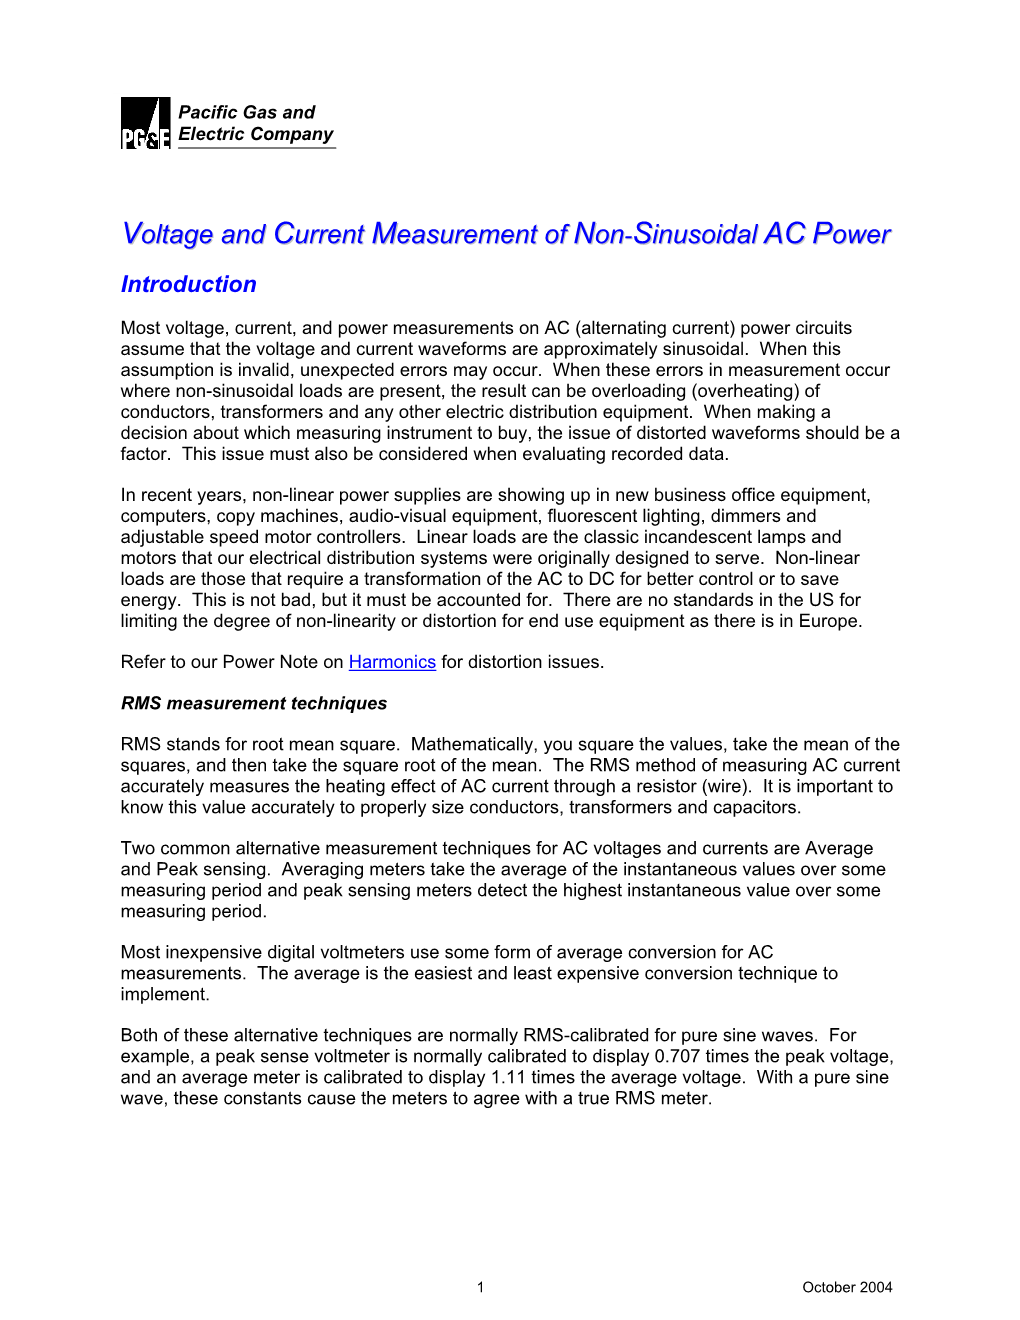 Voltage and Current Measurement of Non-Sinusoidal AC Power Introduction